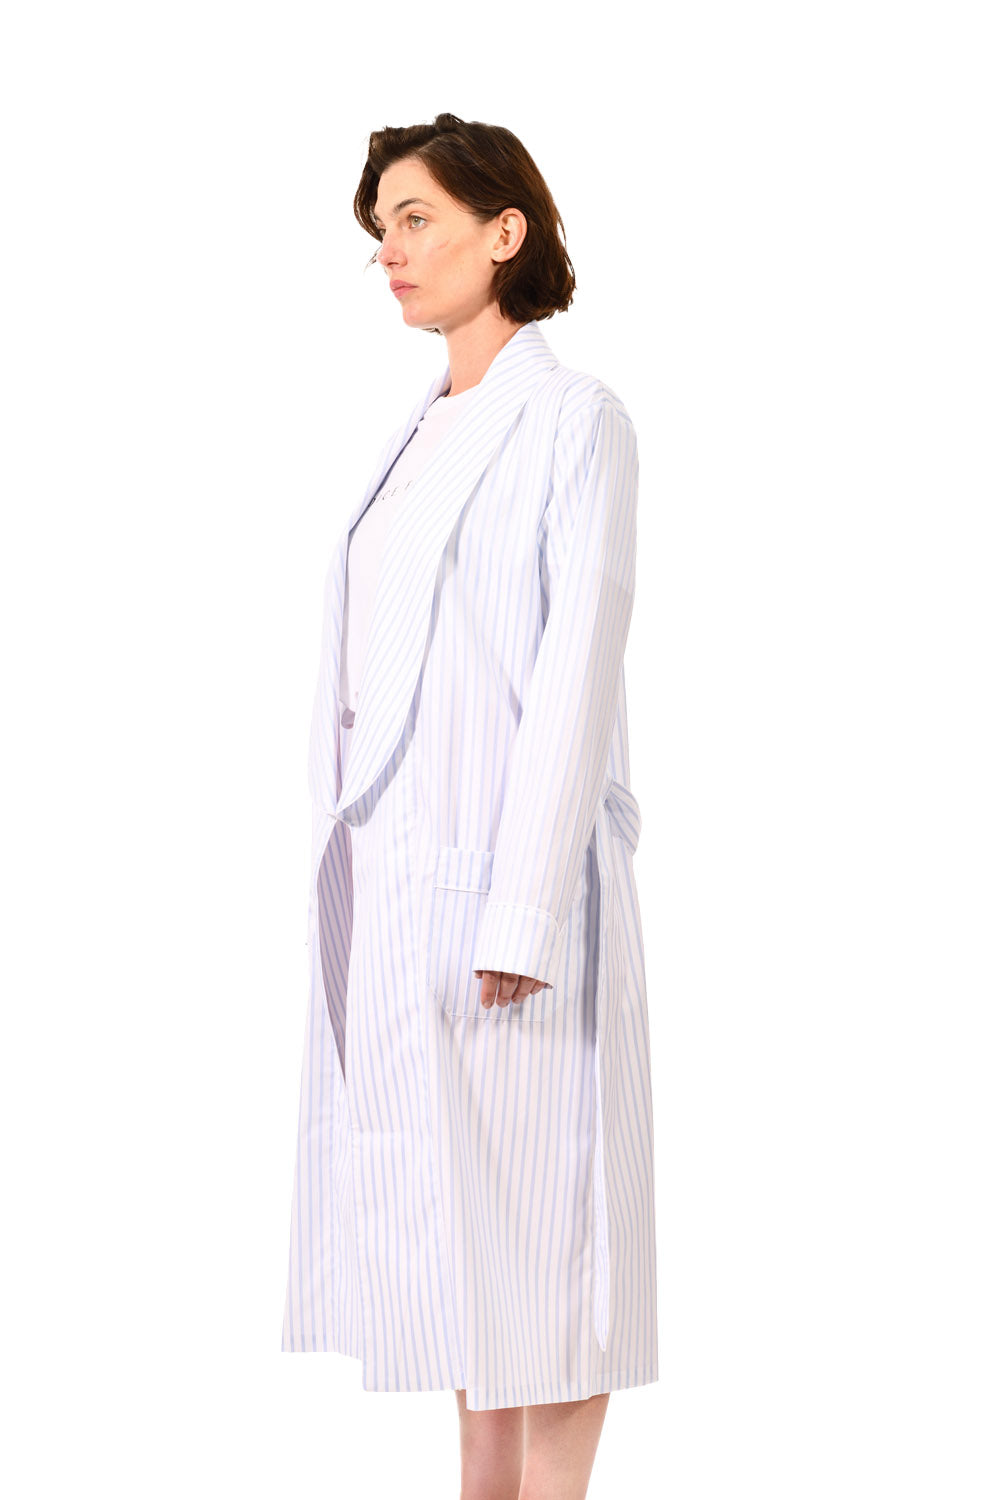 The Brandy in white poplin cotton with blue stripes